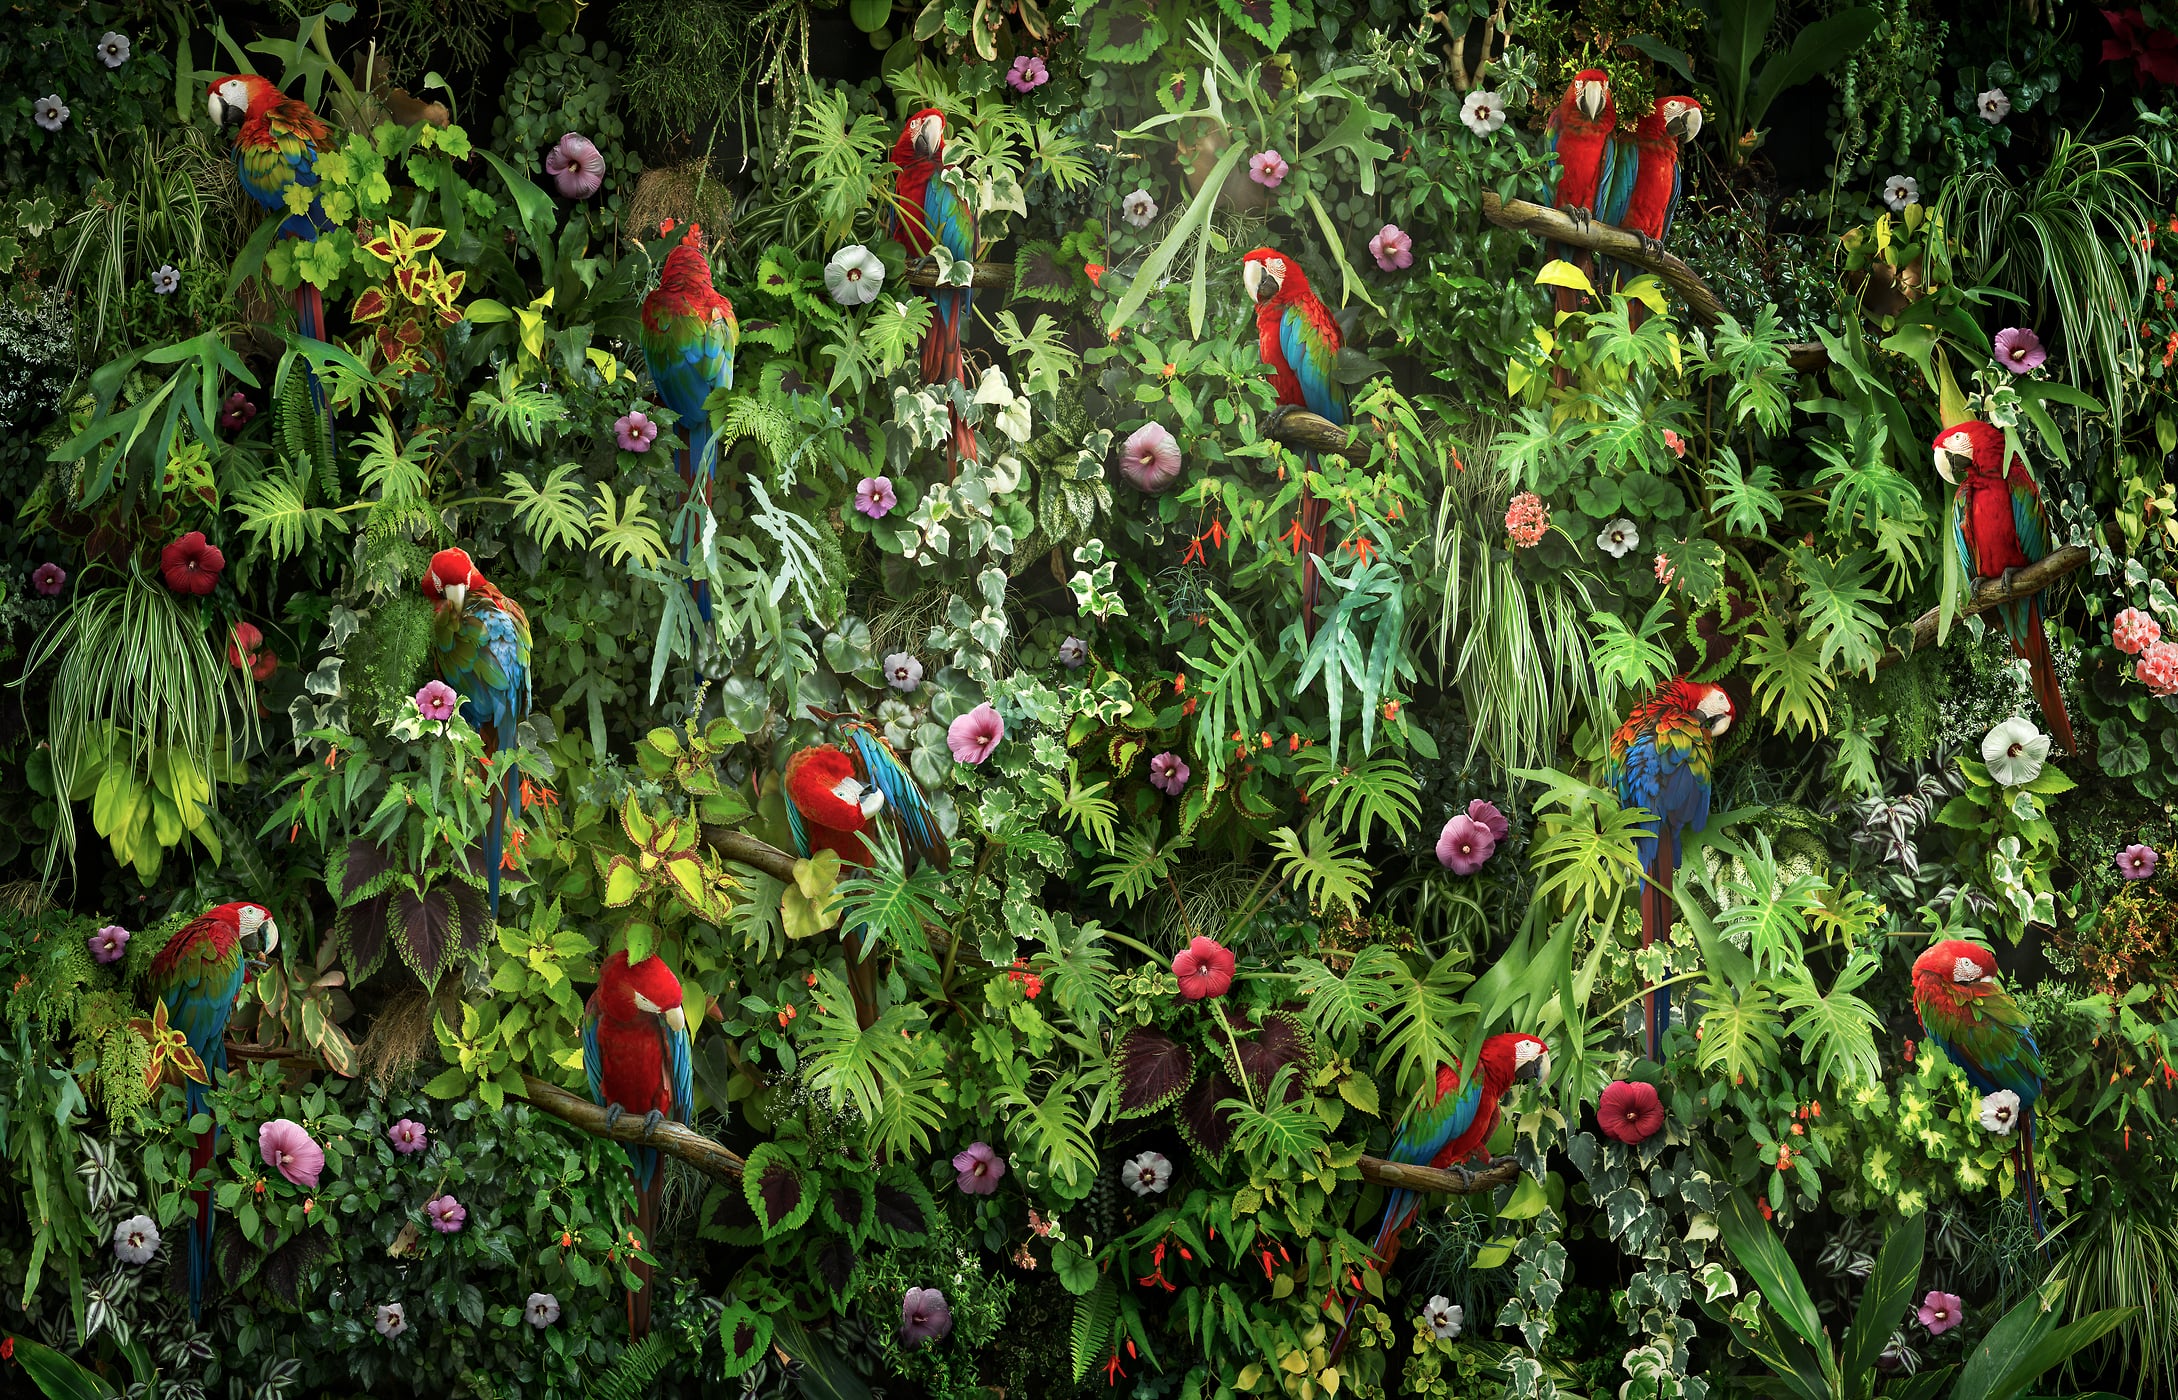 350 megapixels! A very high resolution, large-format nature photo wall art with plants, flowers, and birds; photograph created by Nick Pedersen.